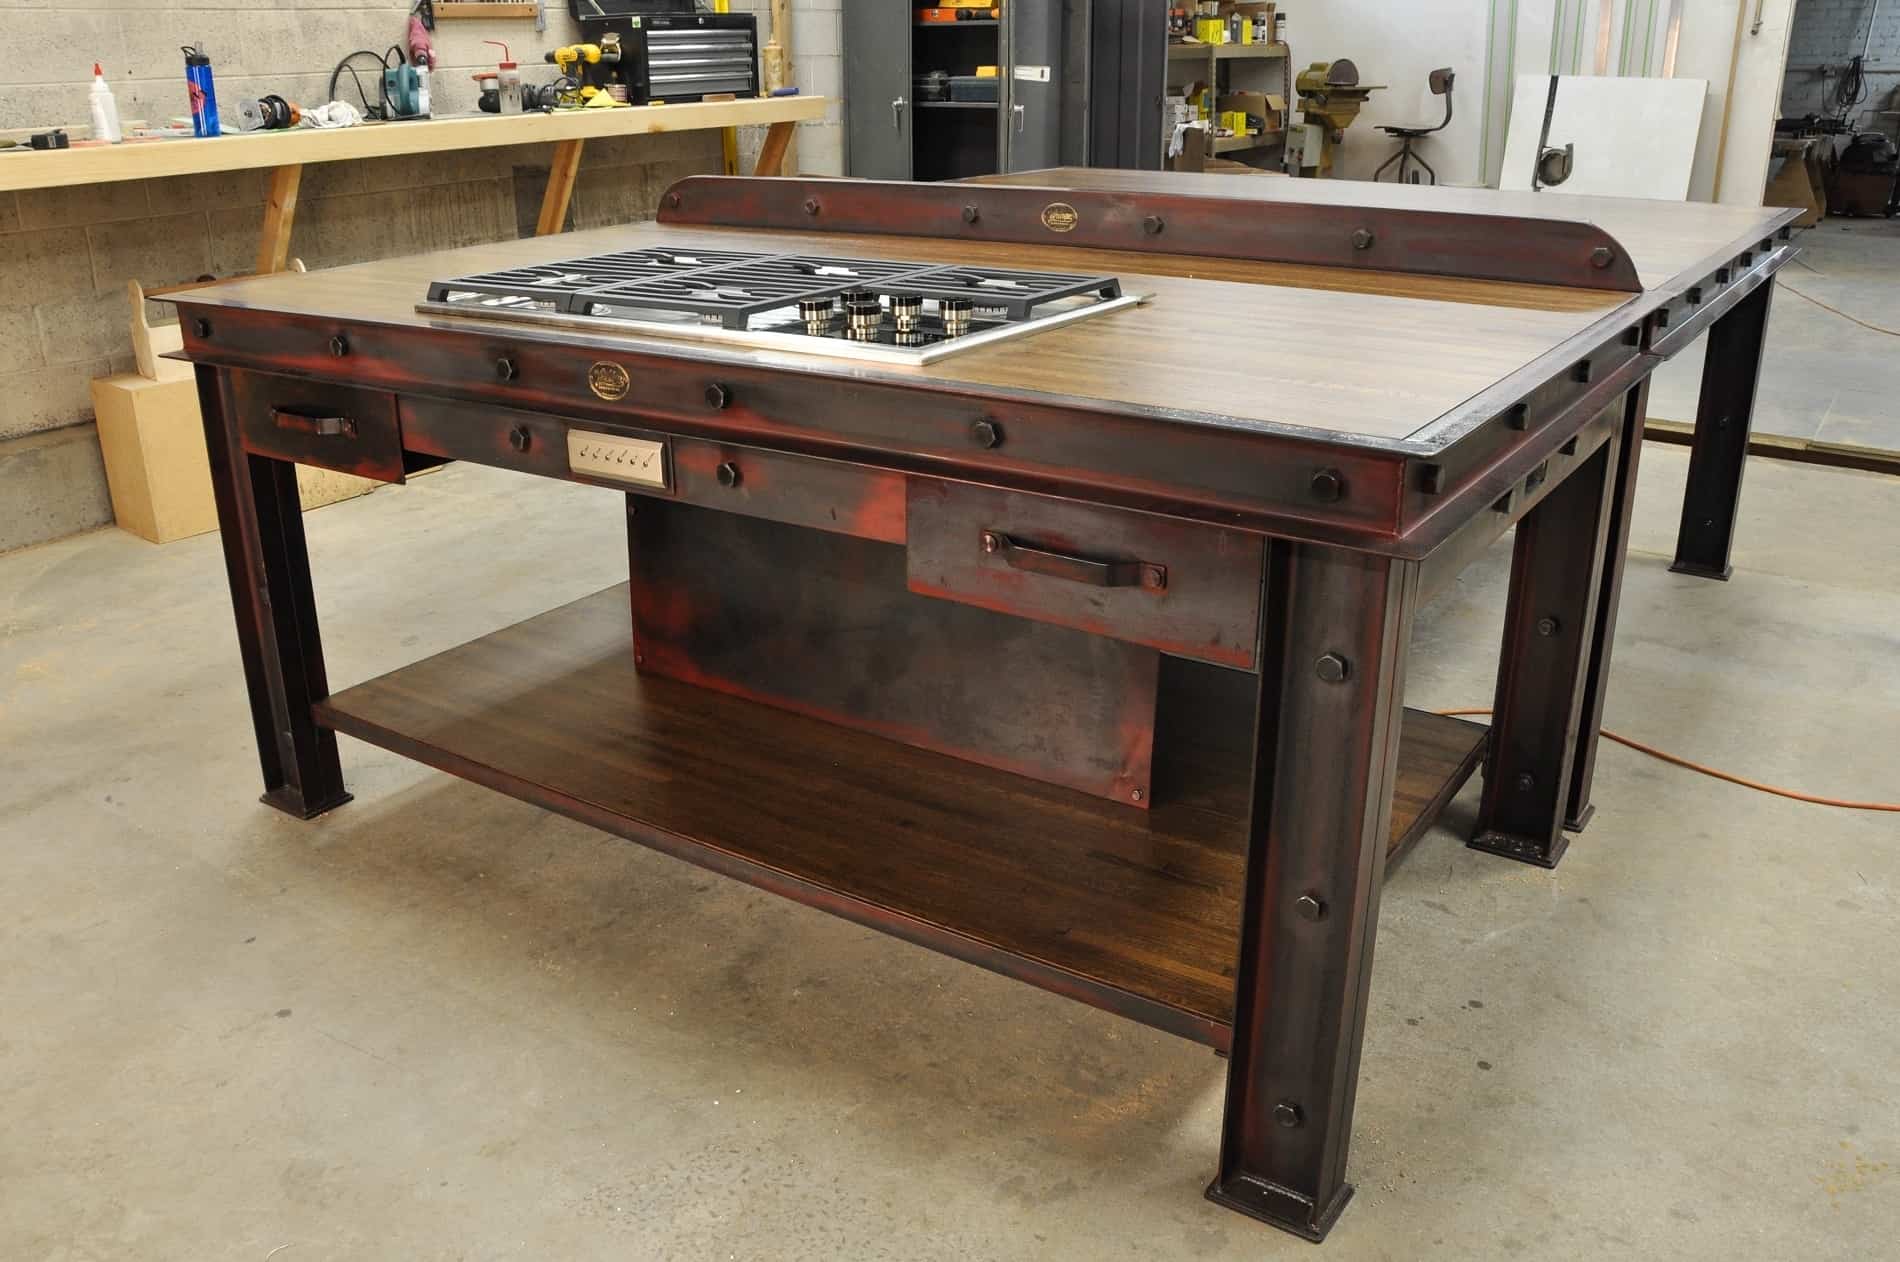 Wooden Kitchen Table With Storage Made From Reclaimed Wood